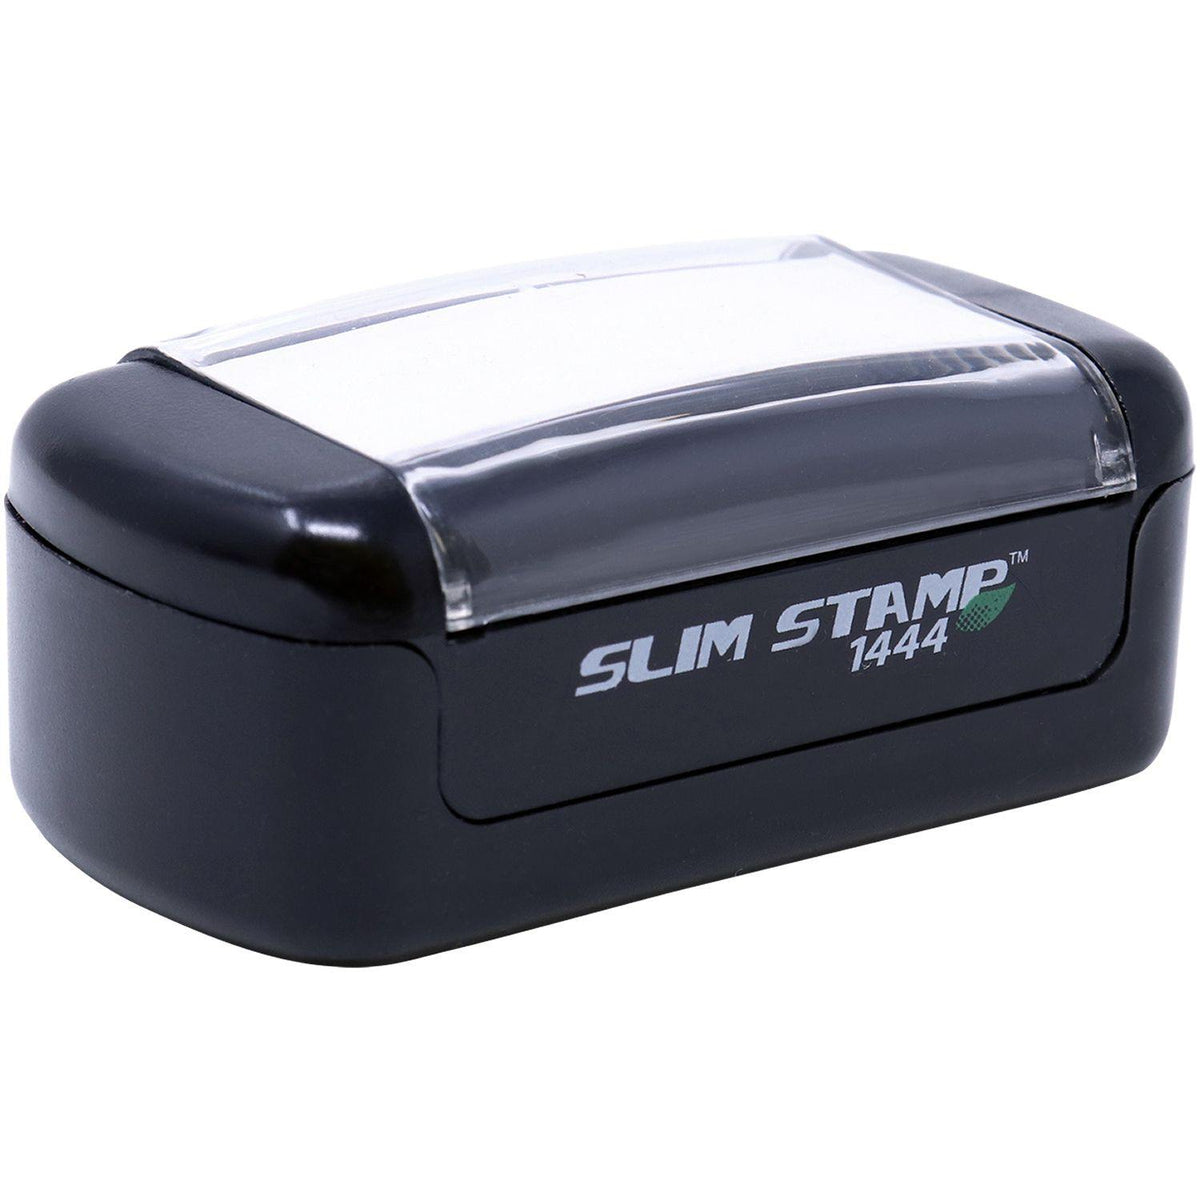 Alt View of Slim Pre-Inked E-Mail Stamp Mount Angle